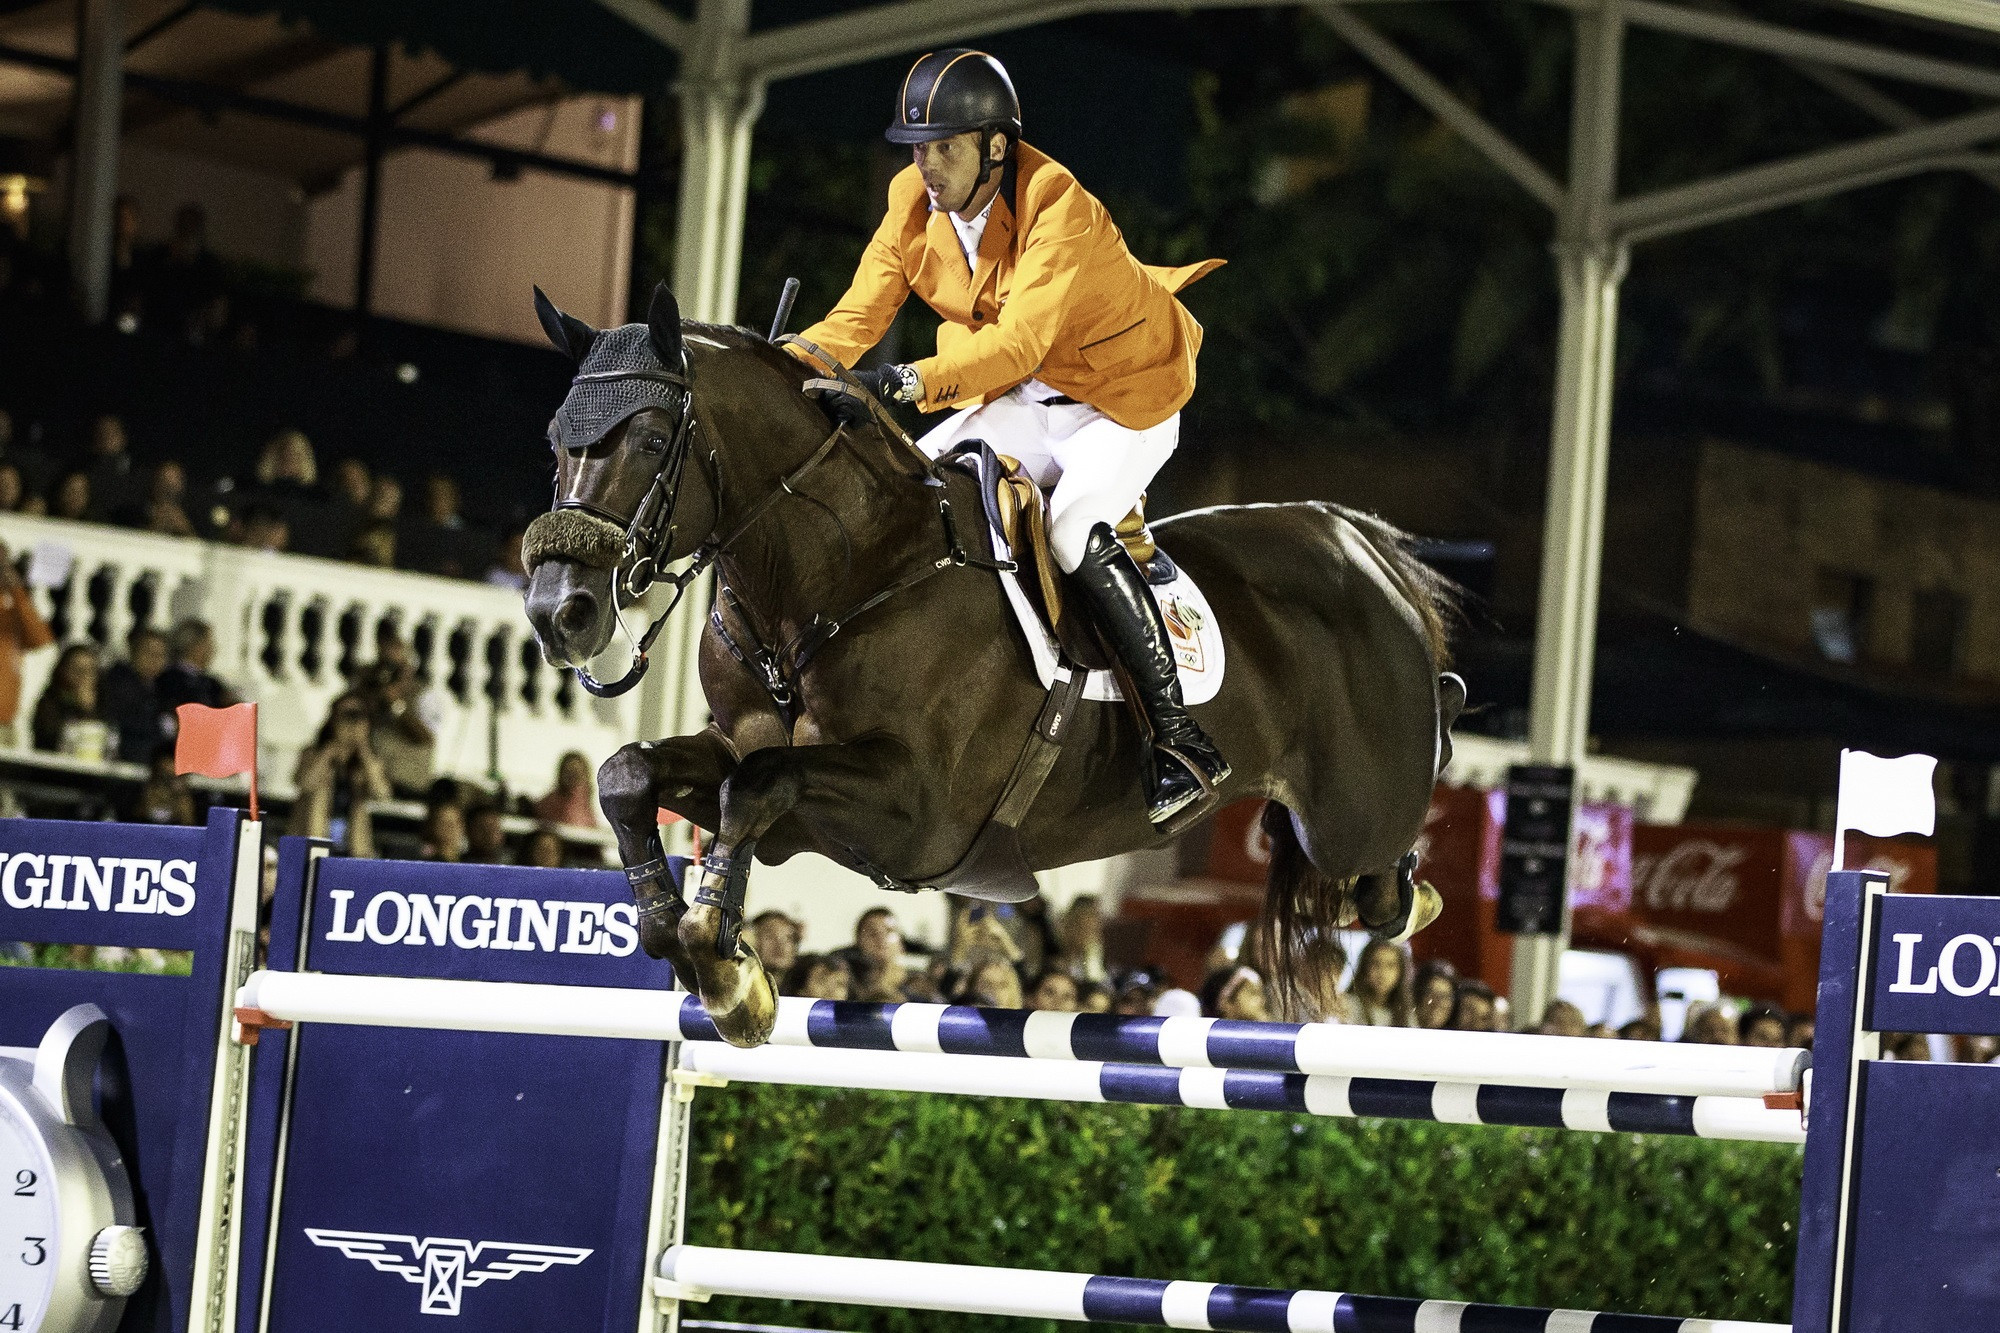 The Netherlands Harrie Smolders has been announced as the latest world number one ©FEI